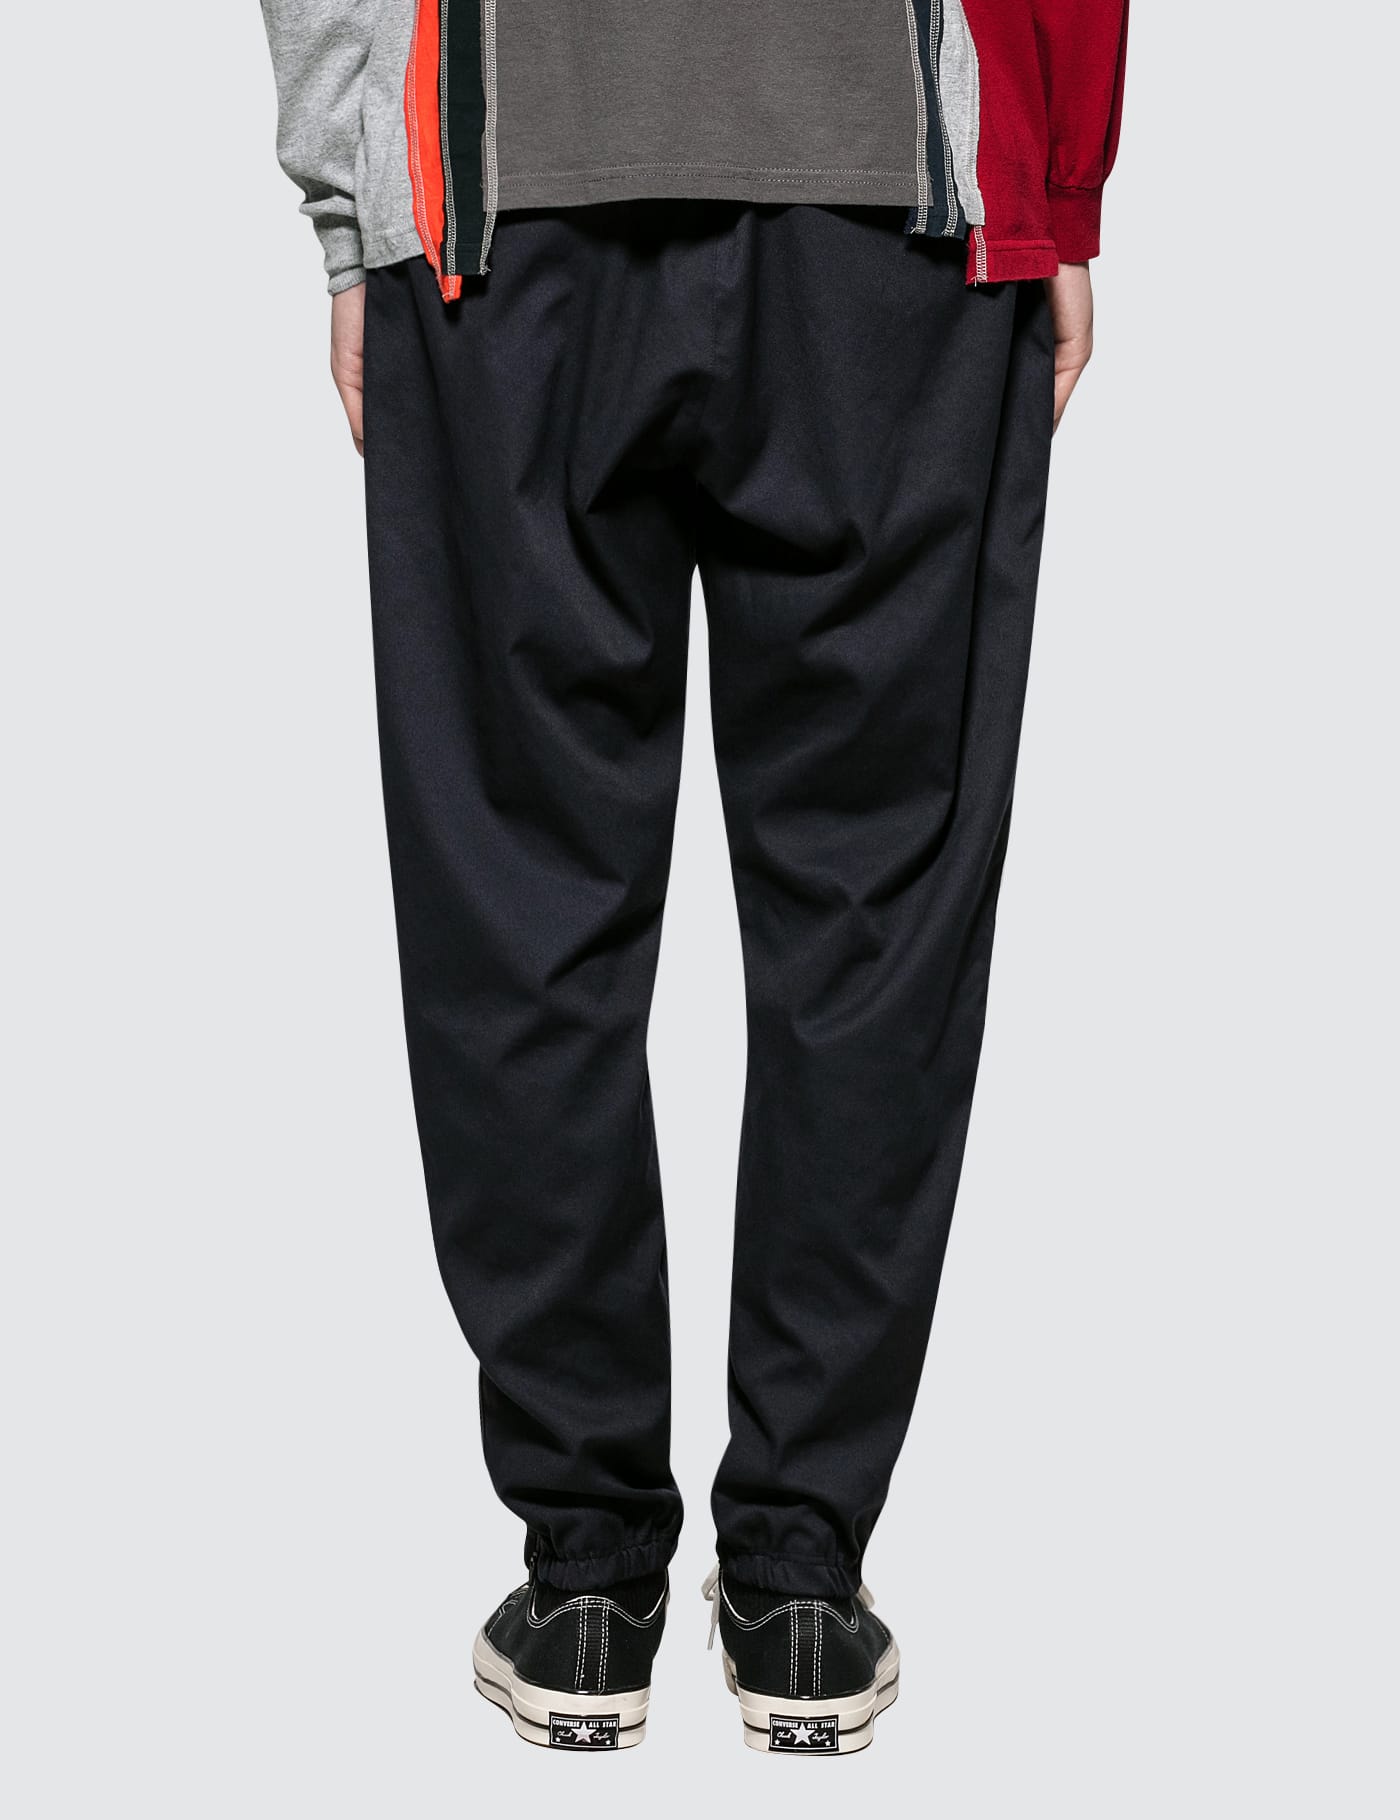 Needles - Side Line Seam Pocket Easy Pant | HBX - Globally Curated 